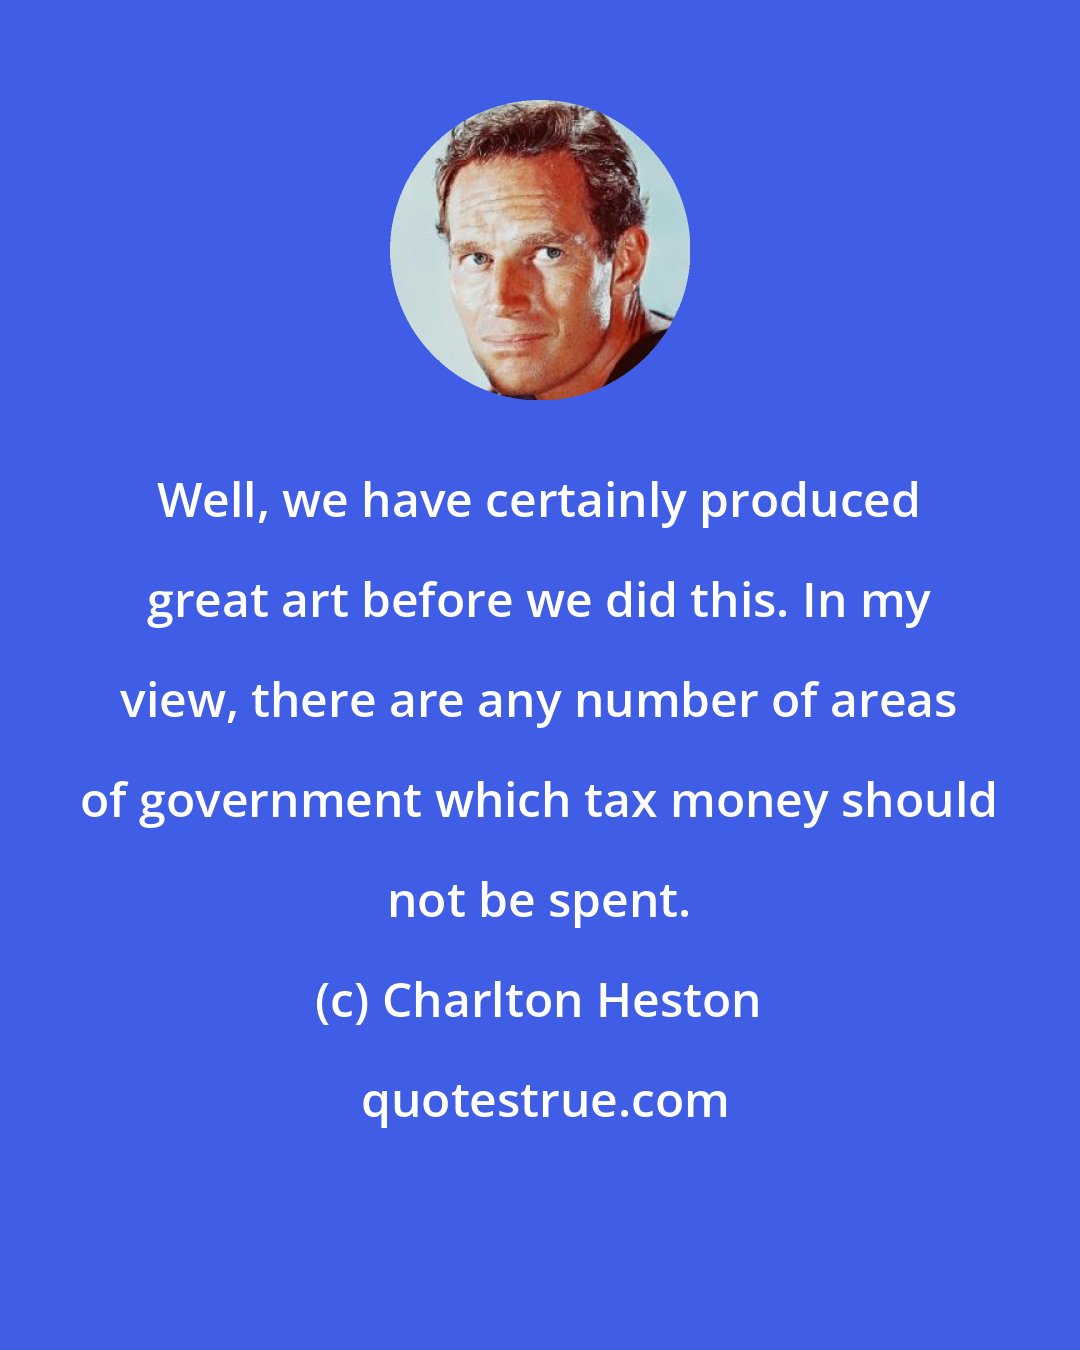 Charlton Heston: Well, we have certainly produced great art before we did this. In my view, there are any number of areas of government which tax money should not be spent.